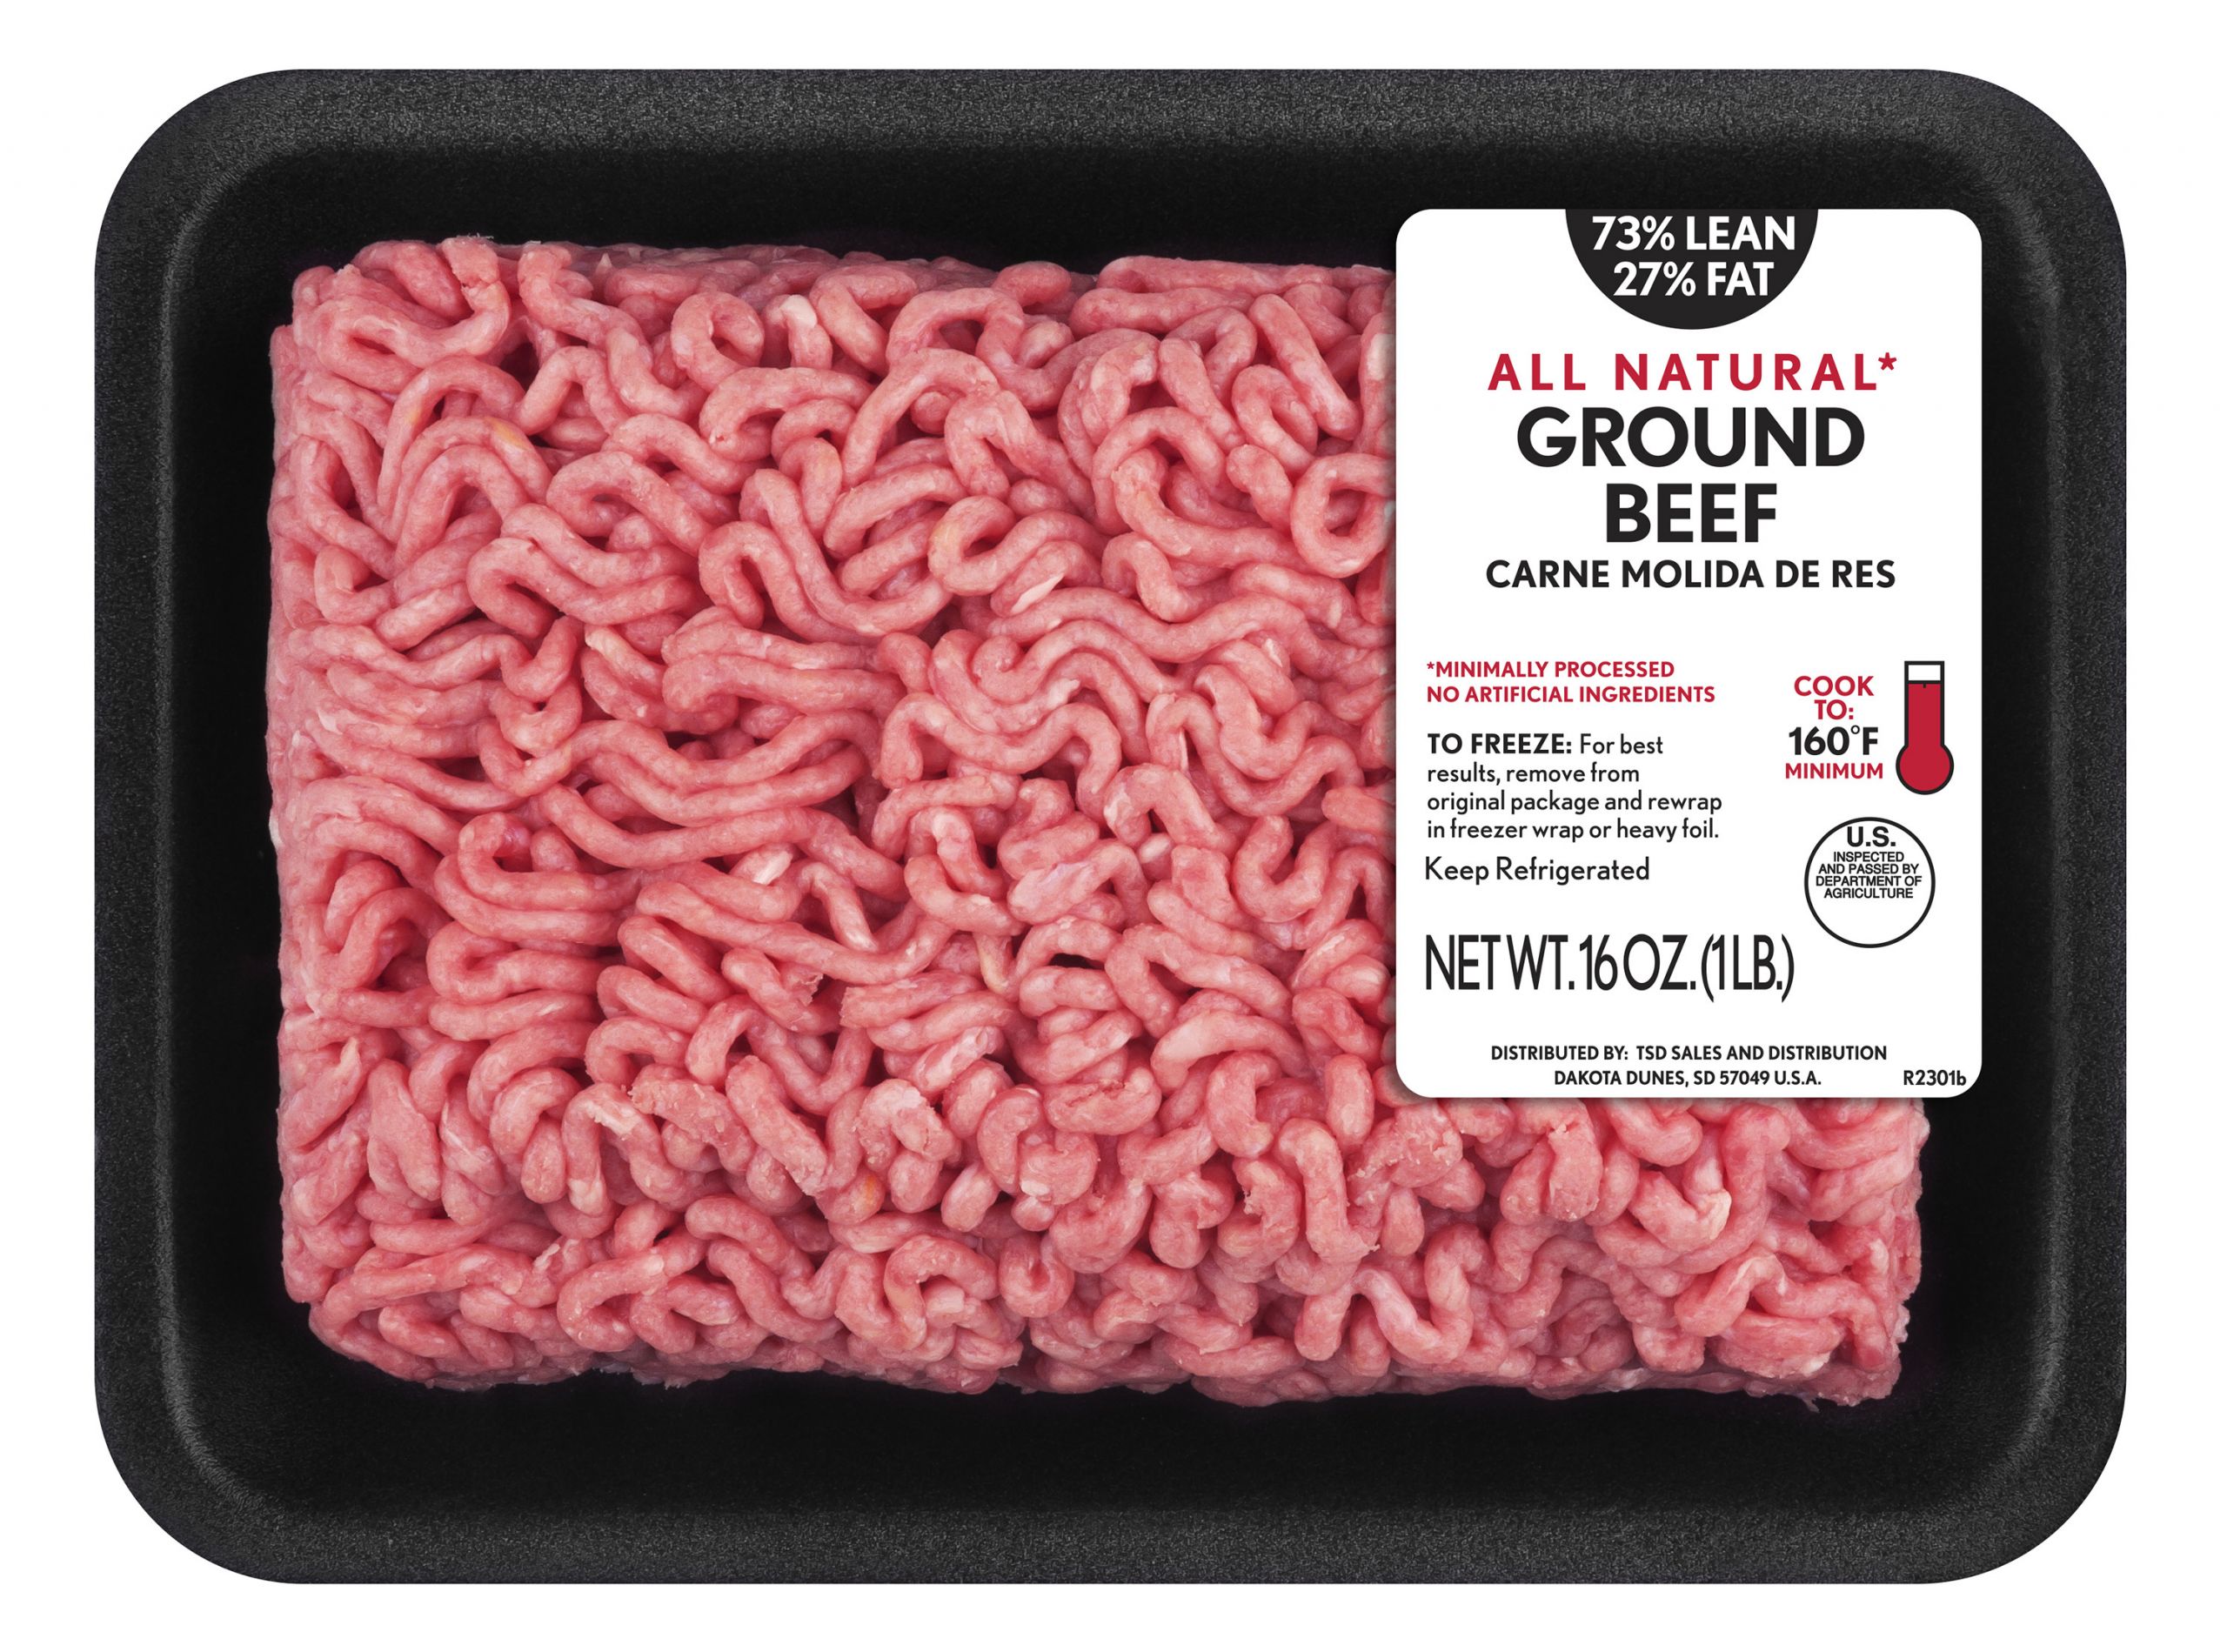 1lb Ground Beef Calories Beautiful All Natural Lean Fat Ground Beef Tray 1 Lb